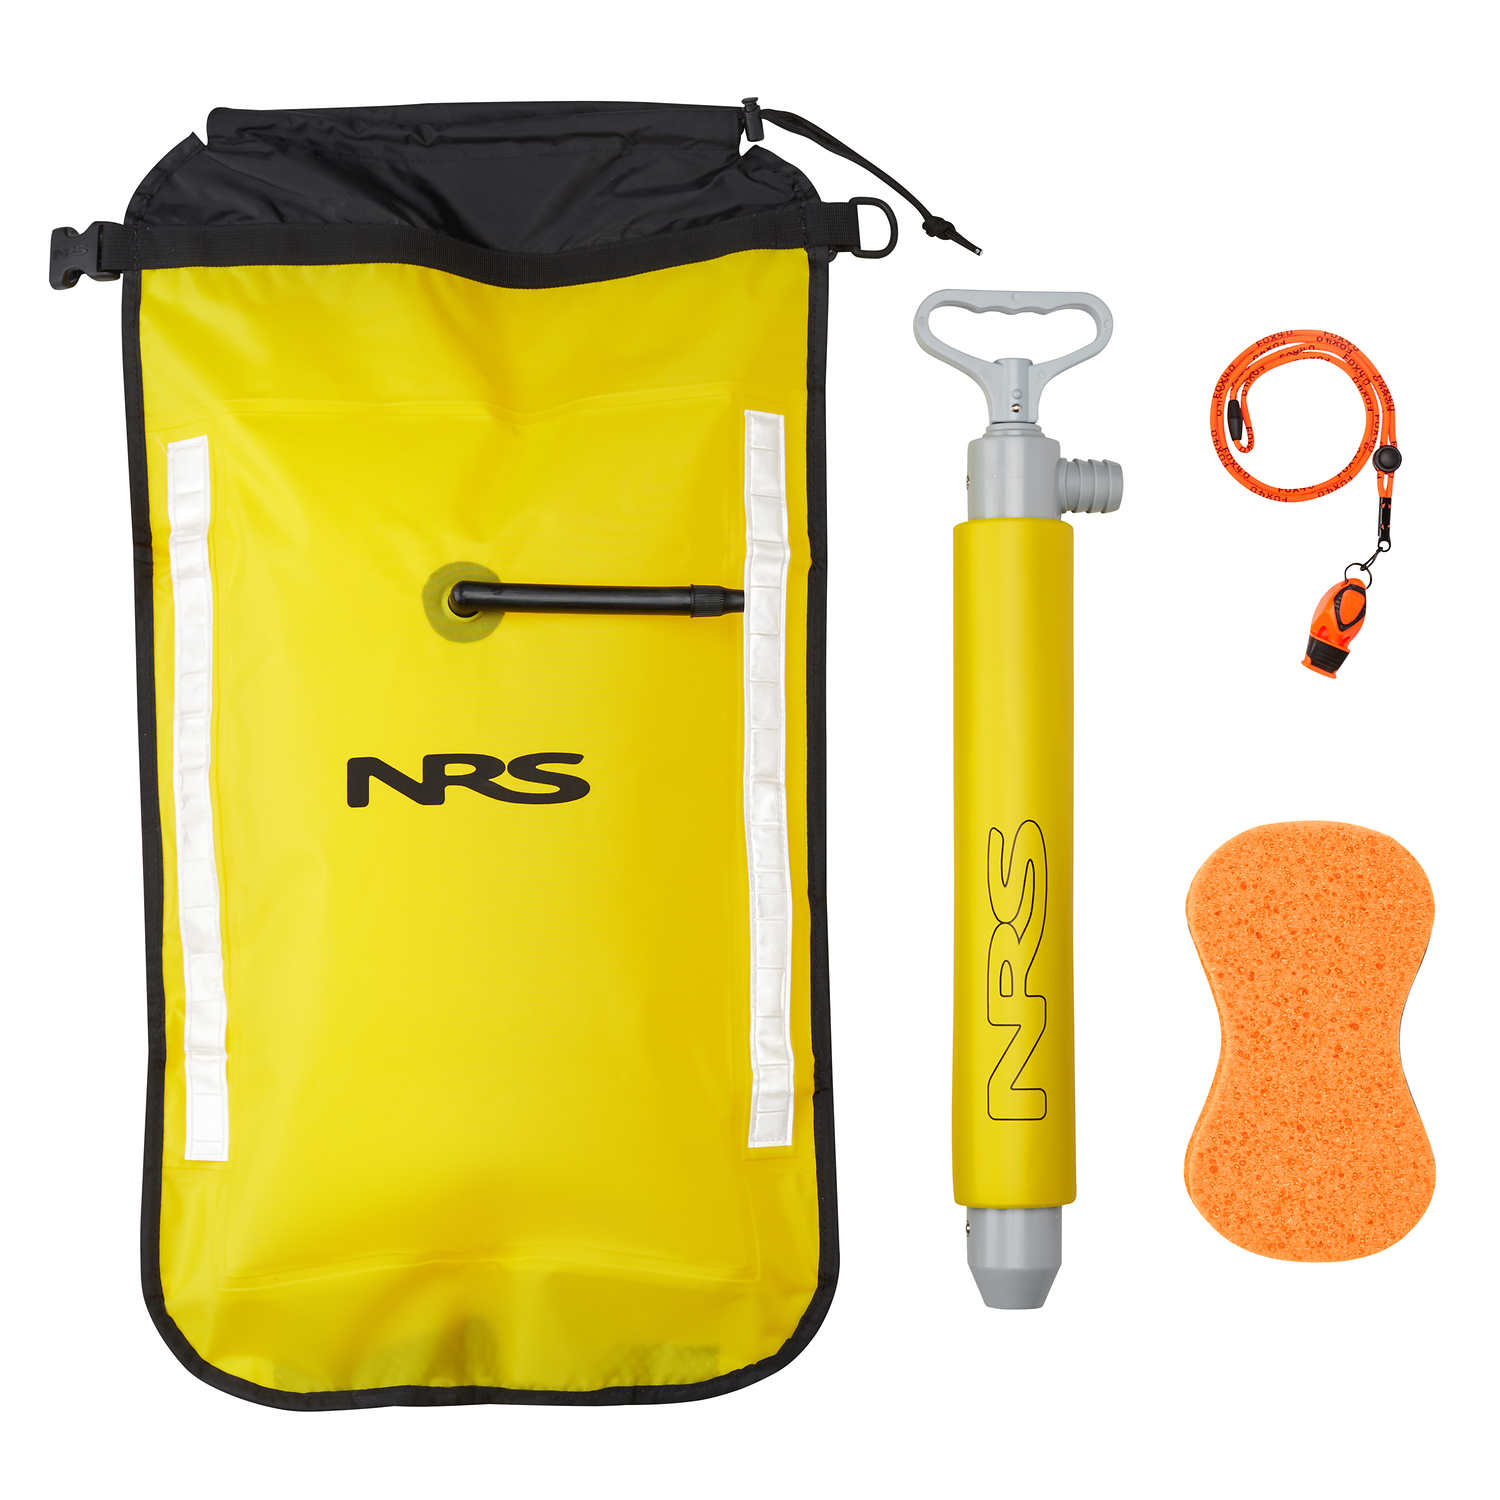 NRS Basic Safety Kit from Seattle Sports â€